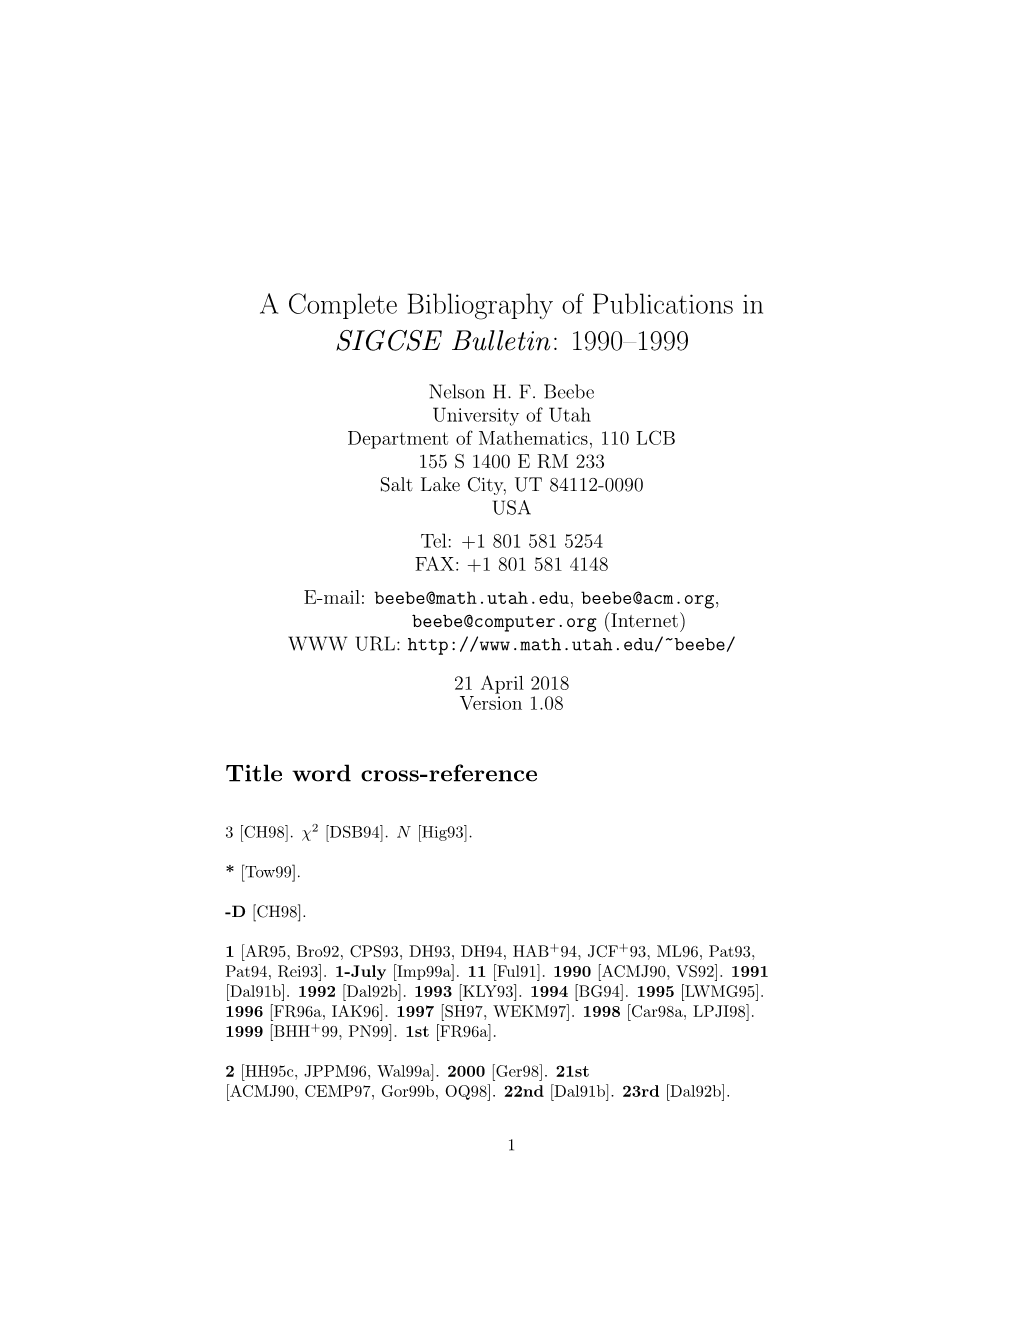 A Complete Bibliography of Publications in SIGCSE Bulletin: 1990–1999